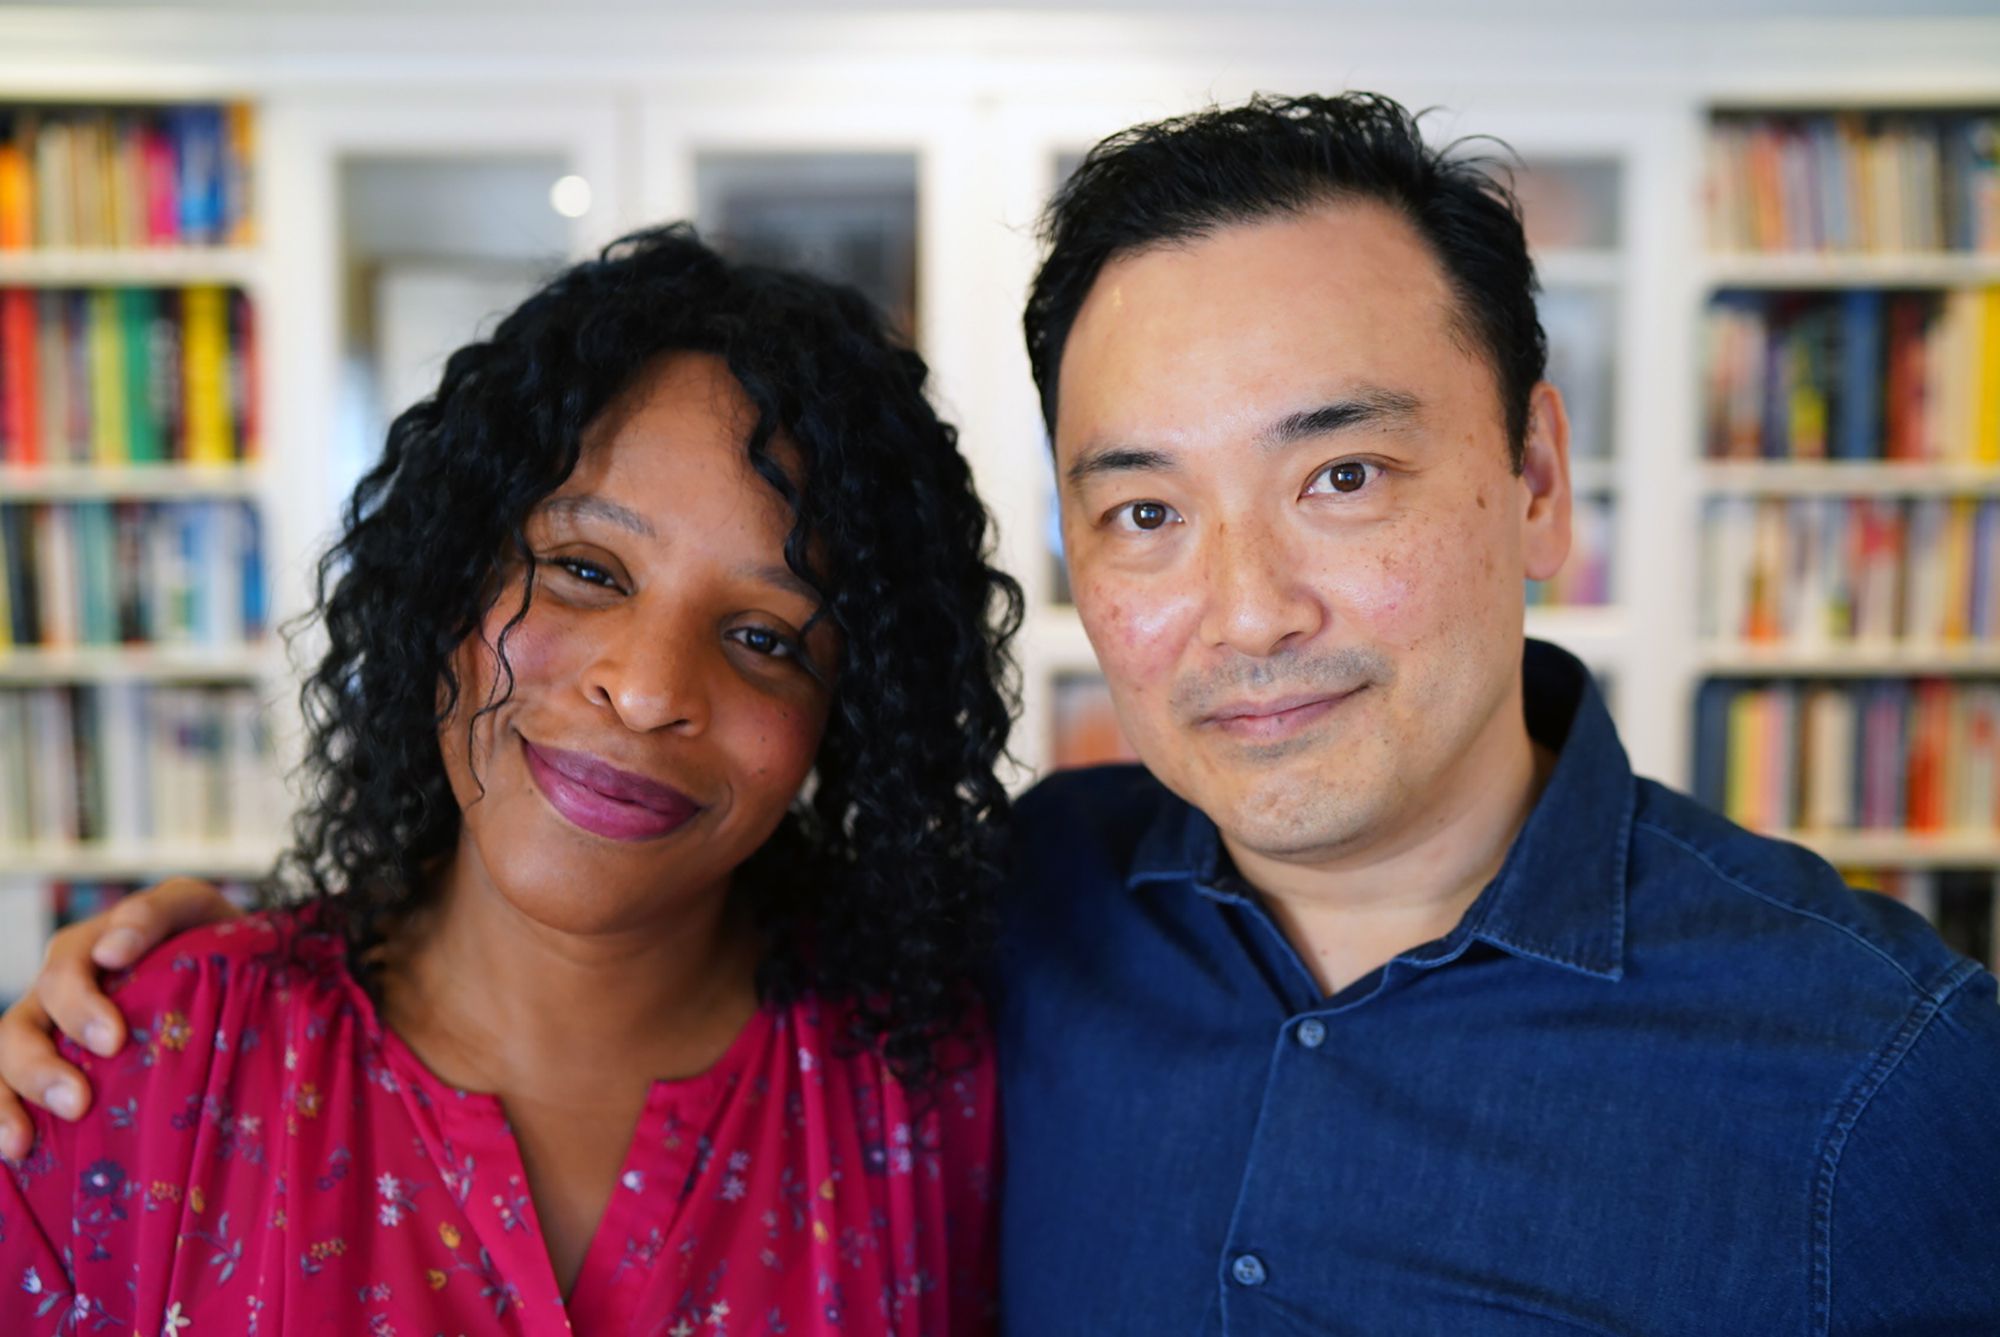 This photo provided by Random House shows Nicola and David Yoon. Best-selling authors David and Nicola Yoon are launching a Random House Children's Books imprint for young adult romance novels by and about people of color. They are calling the imprint Joy Revolution and plan to release the first books in 2022. (Random House via AP)